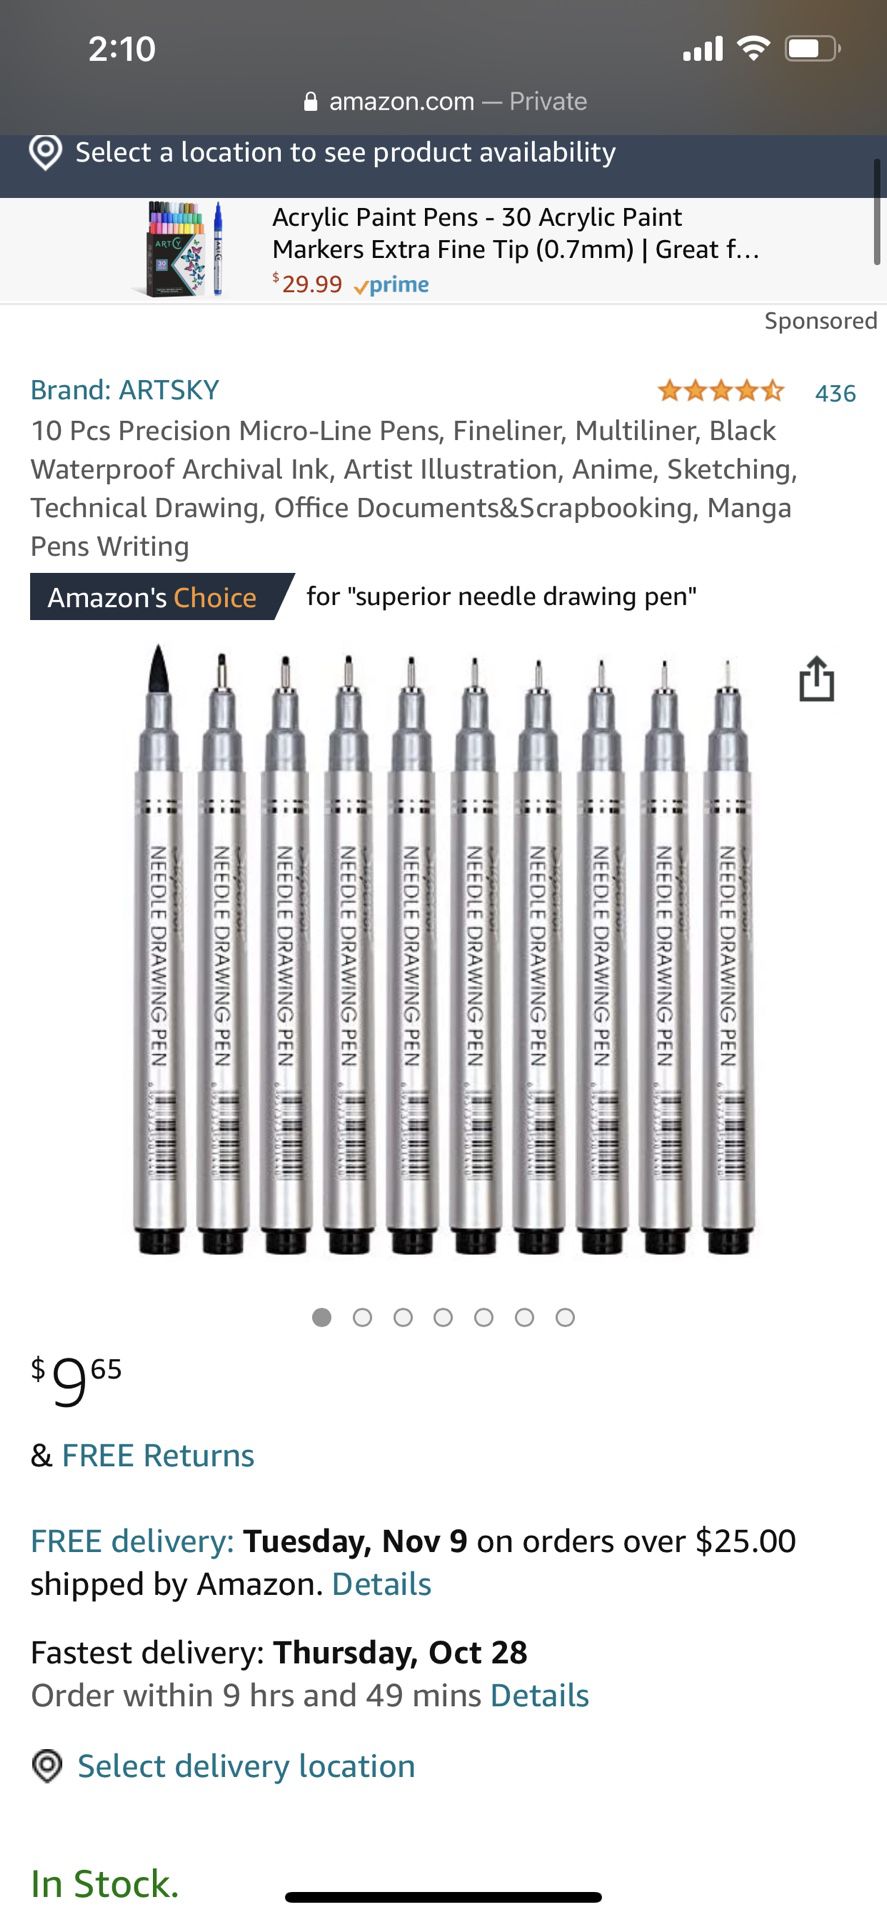 10 Pcs Precision Micro-Line Pens, Fineliner, Multiliner, Black Waterproof Archival Ink, Artist Illustration, Anime, Sketching, Technical Drawing, Offi